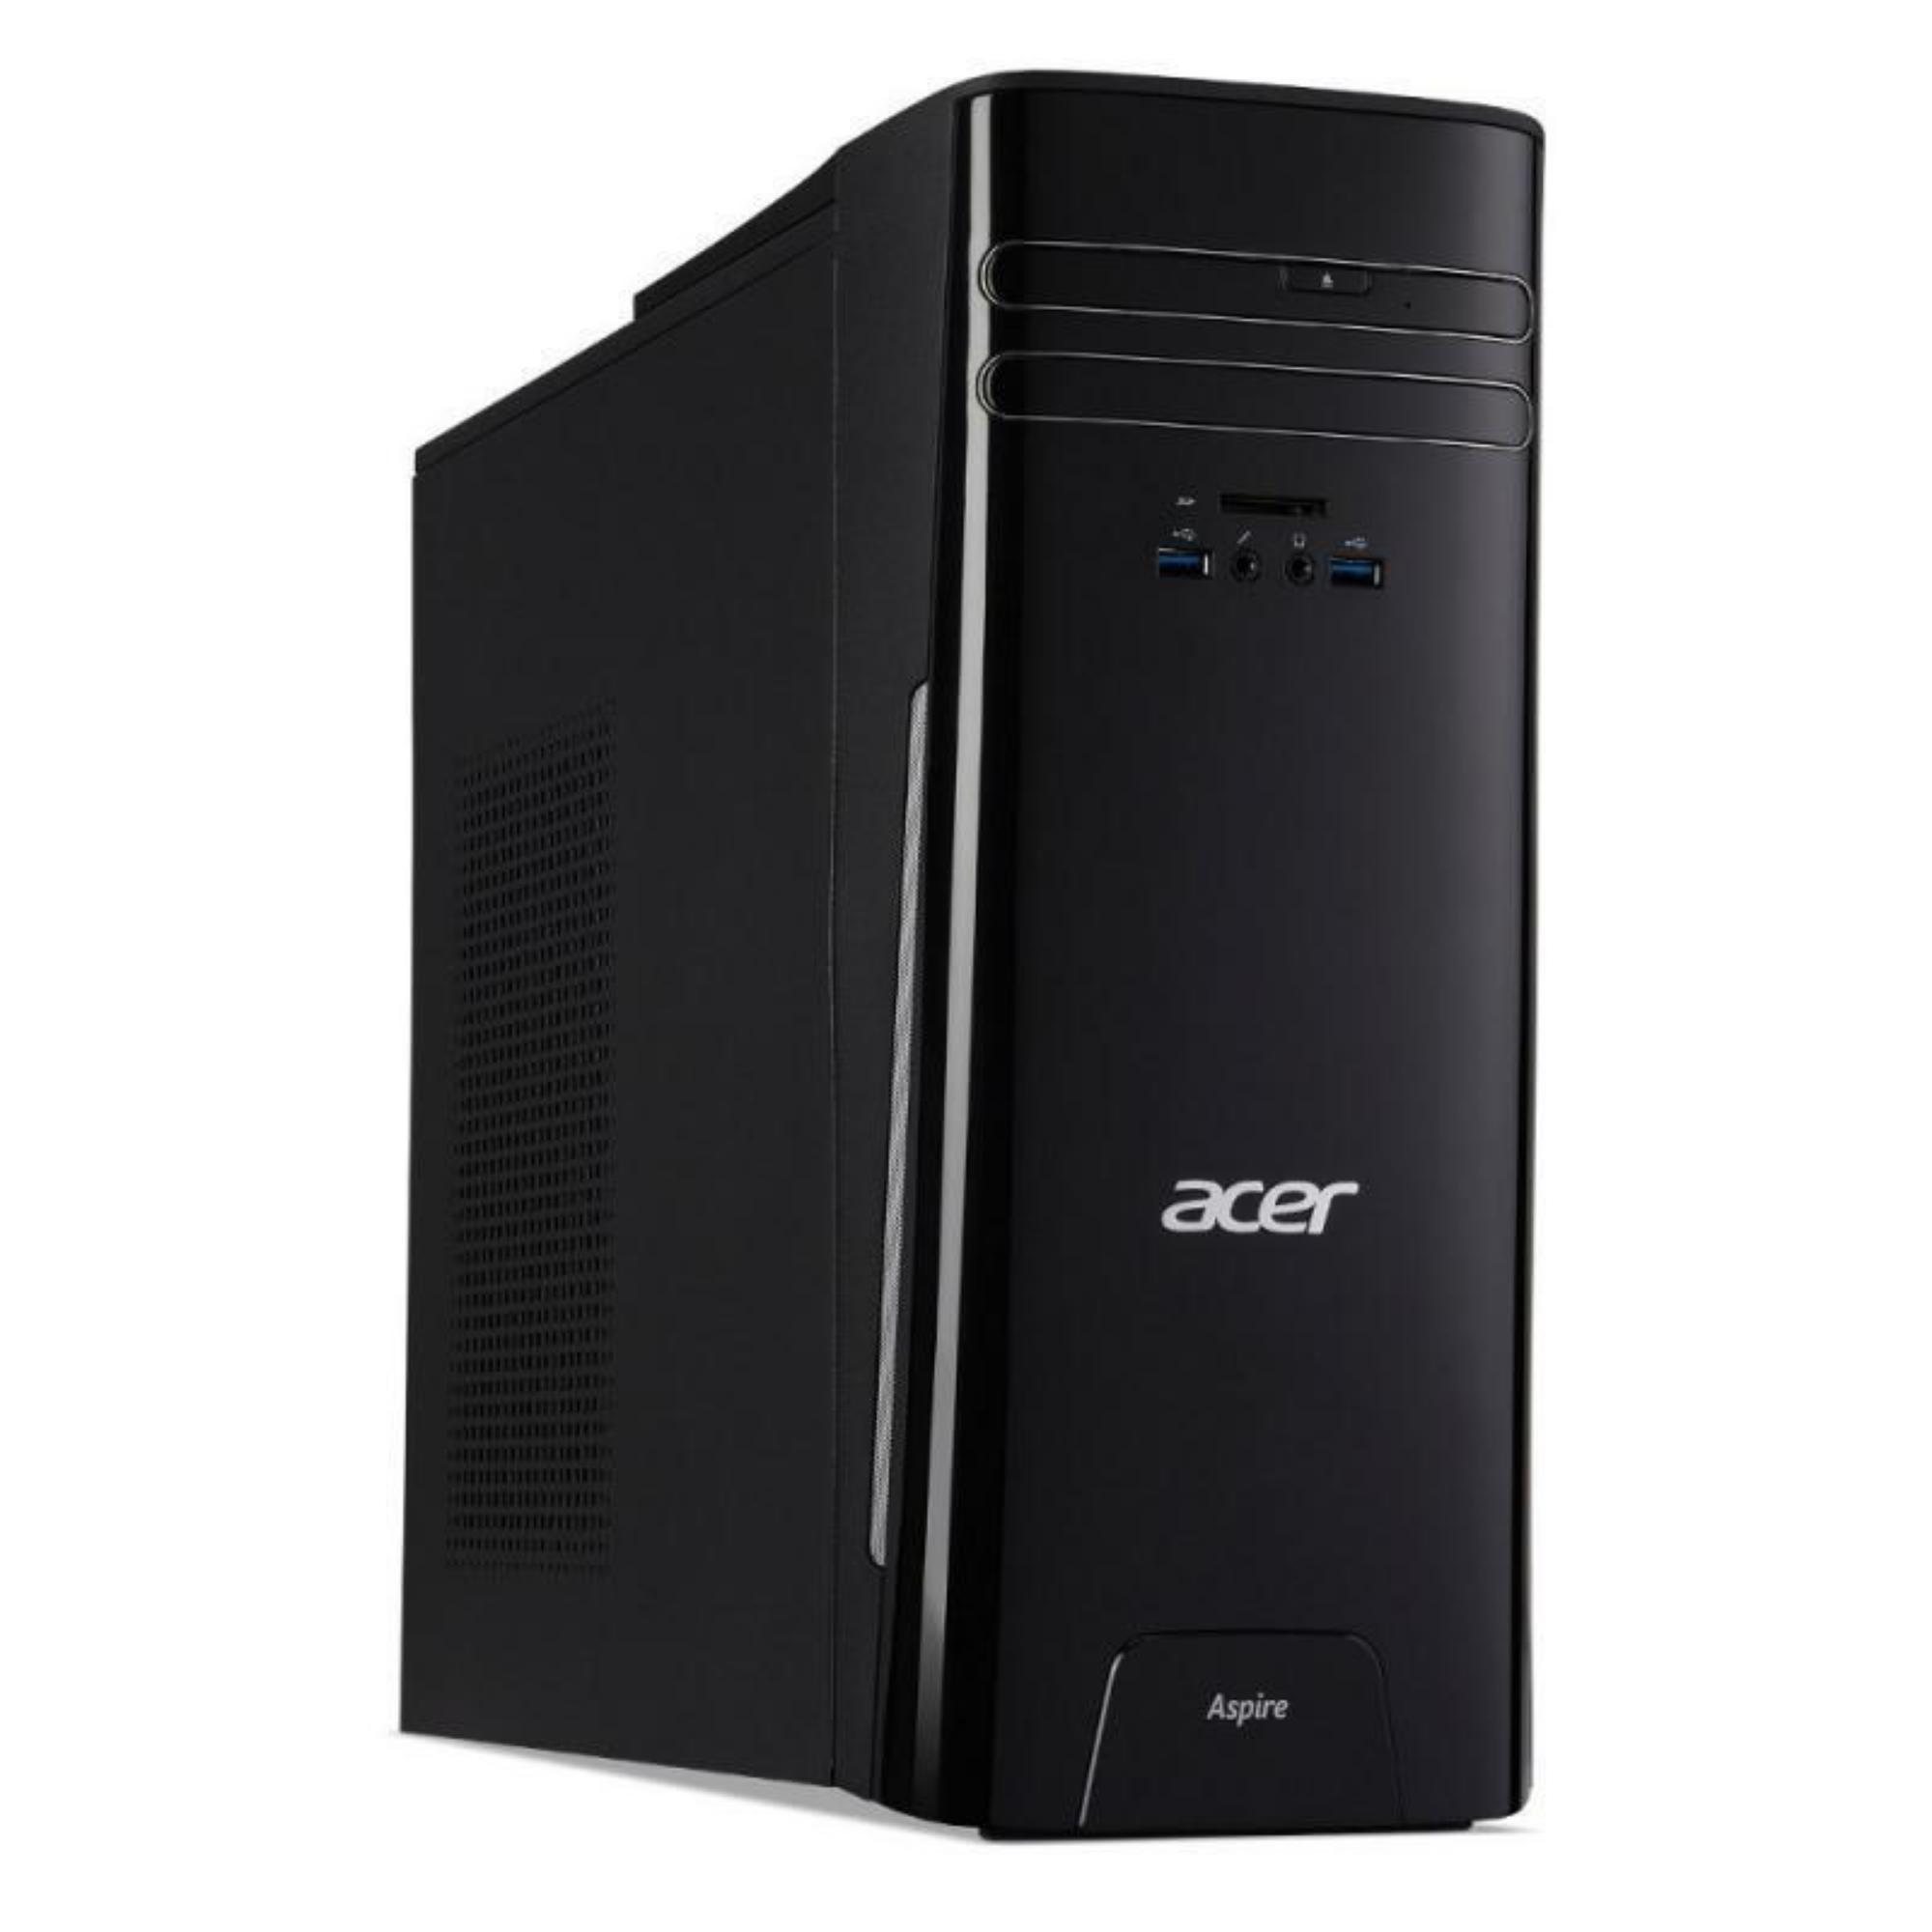 Tower – ACER ASPIRE TC-280 / AMD A10-7800 / 1TB HDD / 8GB / Radeon R7 / W10 – AA280AMD-B<br><br><span STYLE="background:#39ac37;"><font color="white"> DISPONIBILE </font></span>